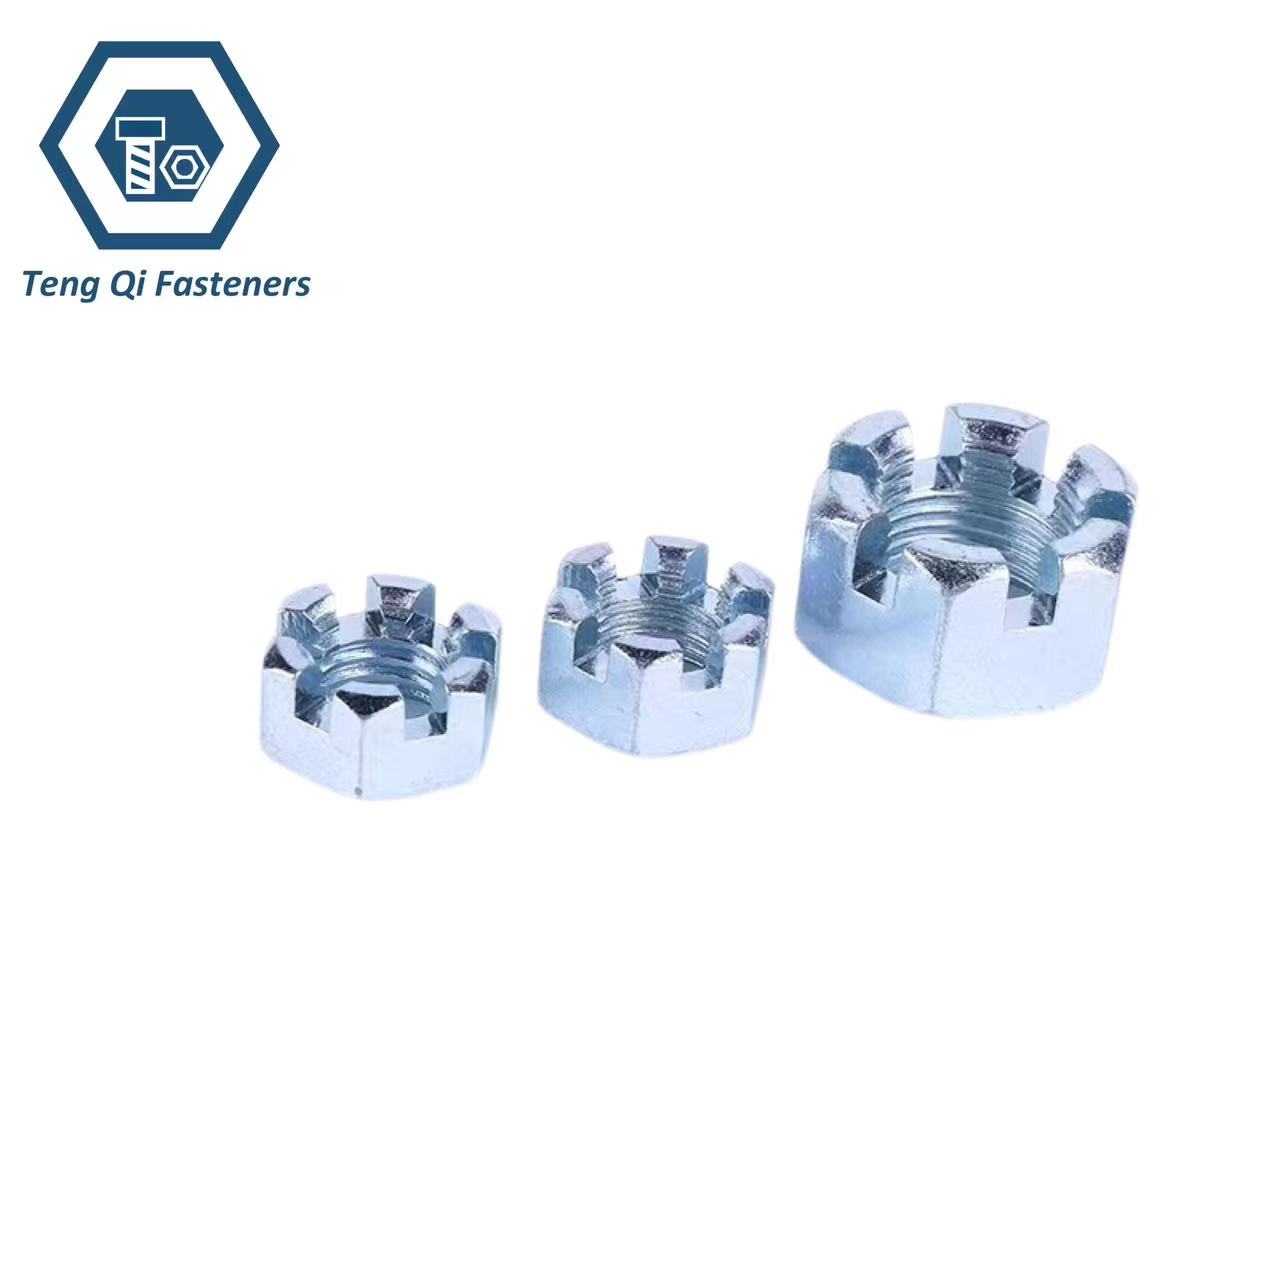 ASME ANSI B 18.2.2 Zinc Plated High Quality Hex Slotted Nuts